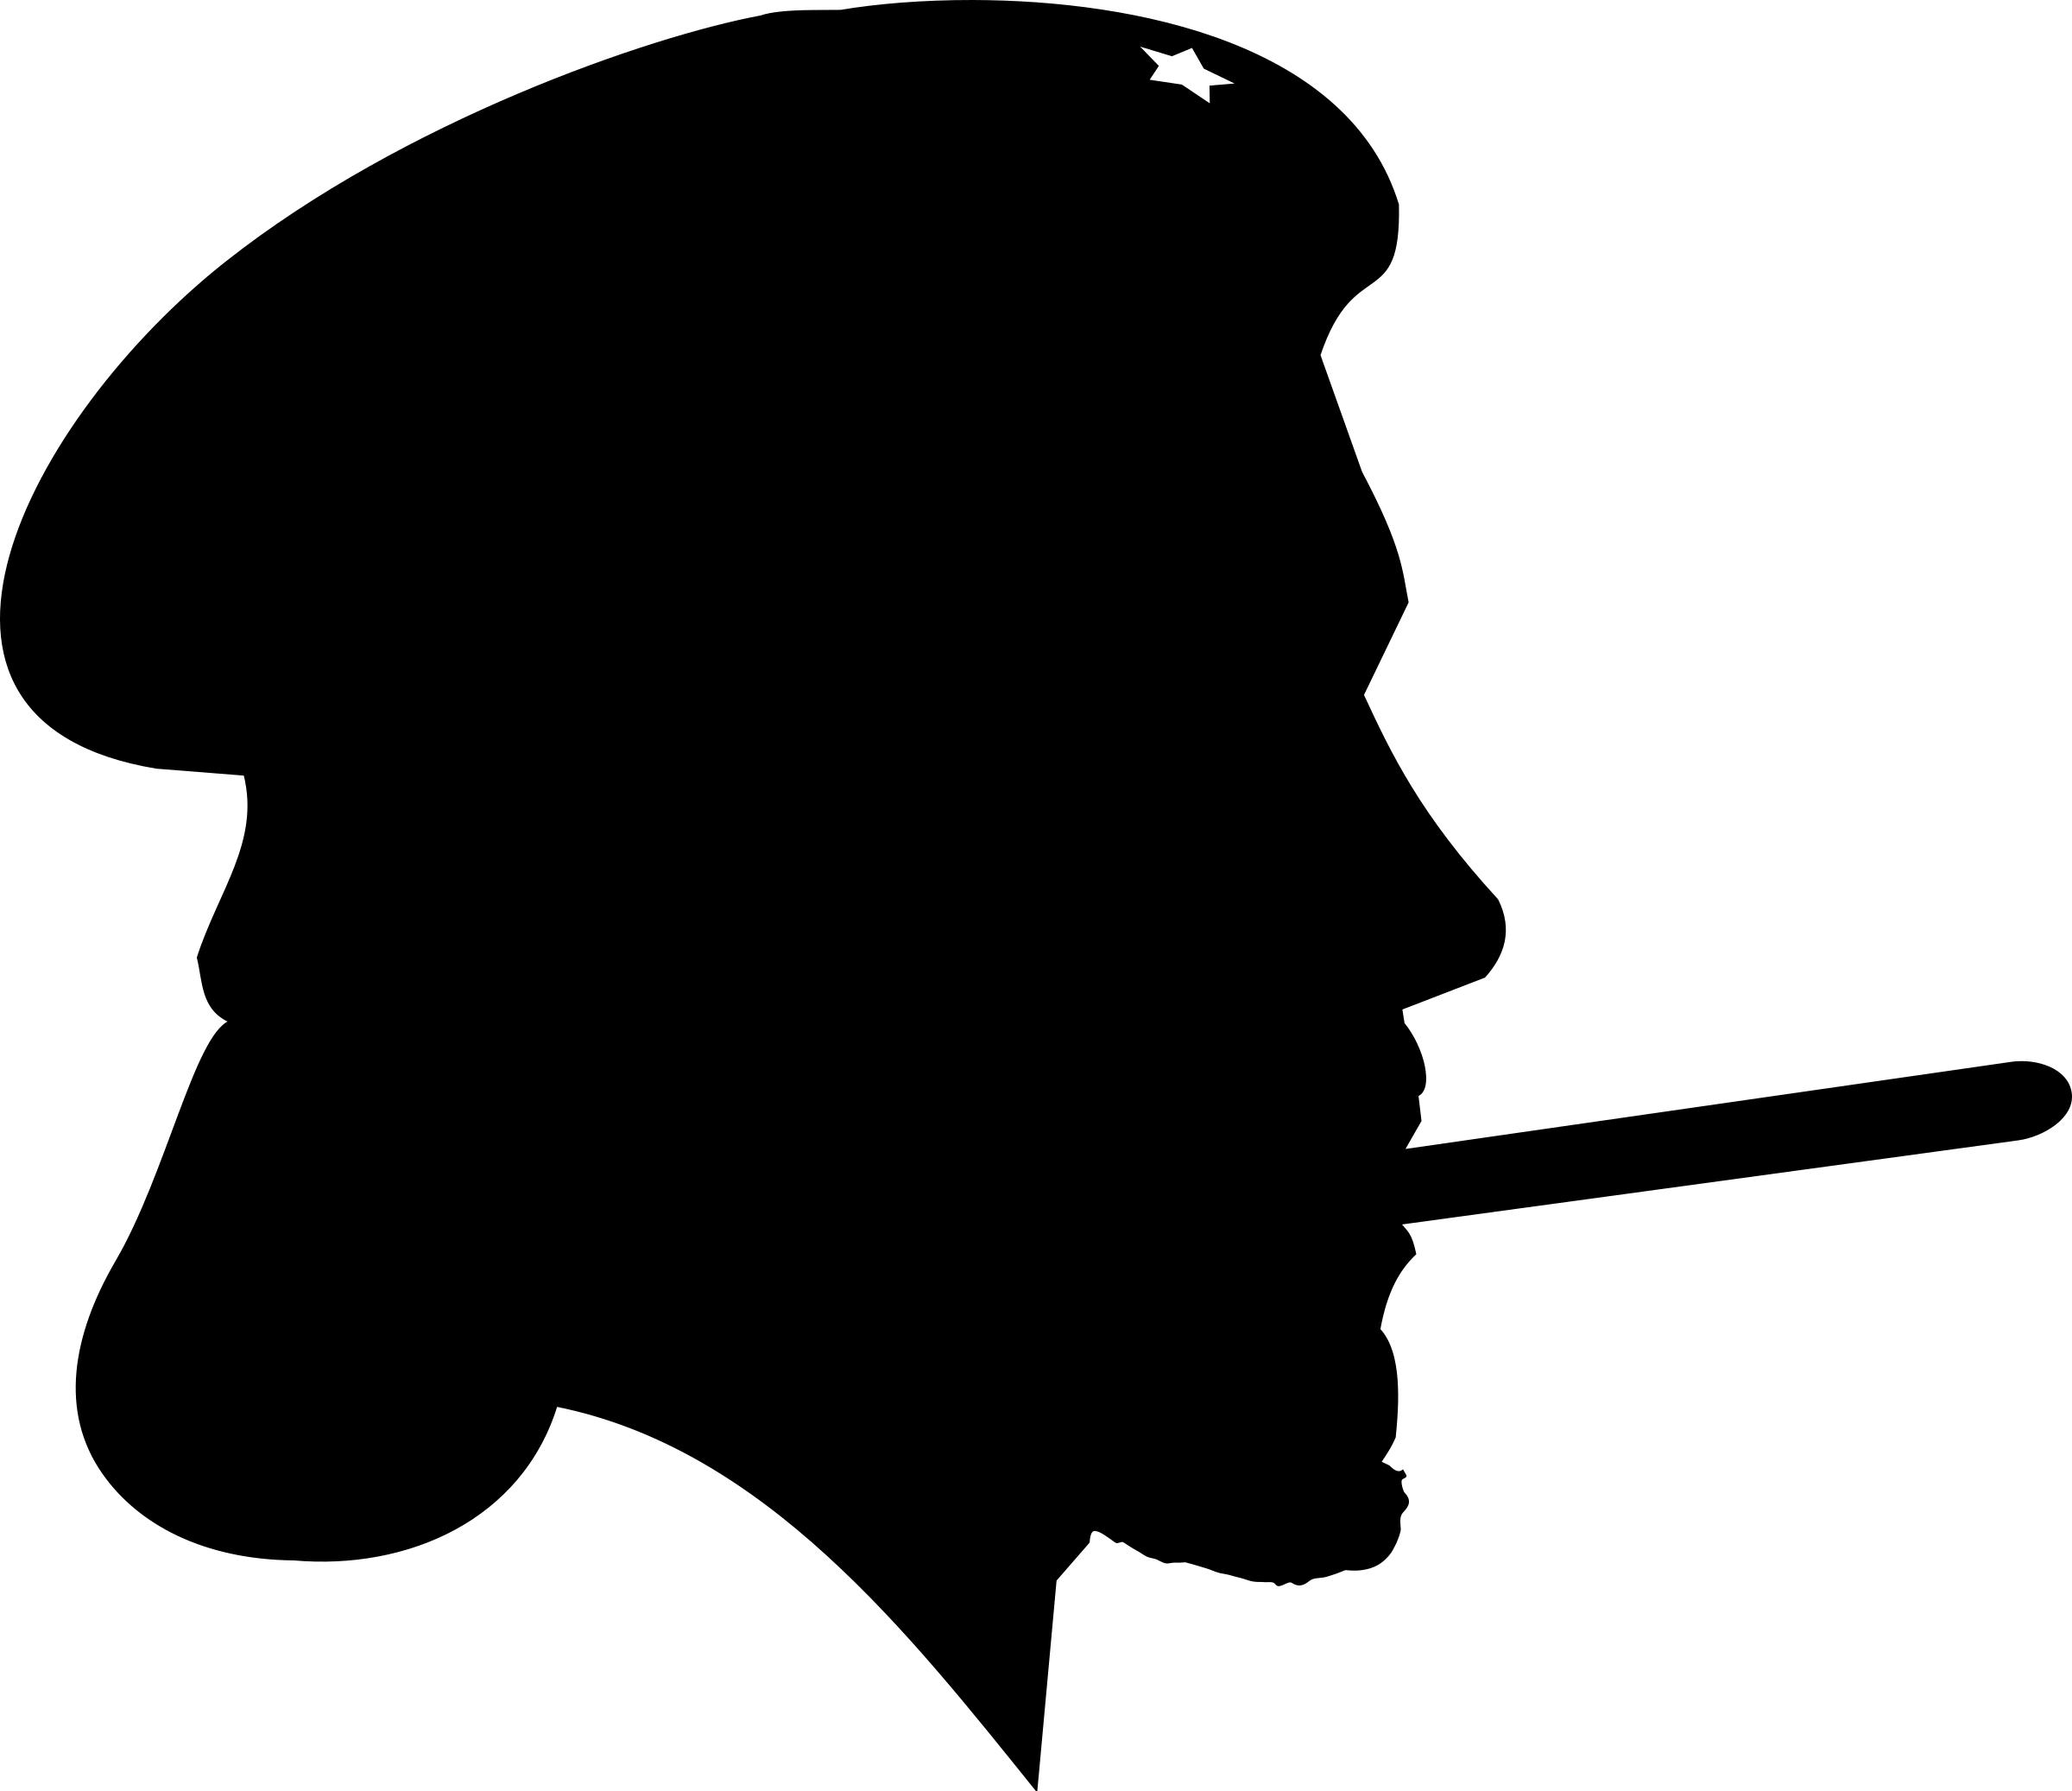 Revolutionary with cigar Silhouette Profile png